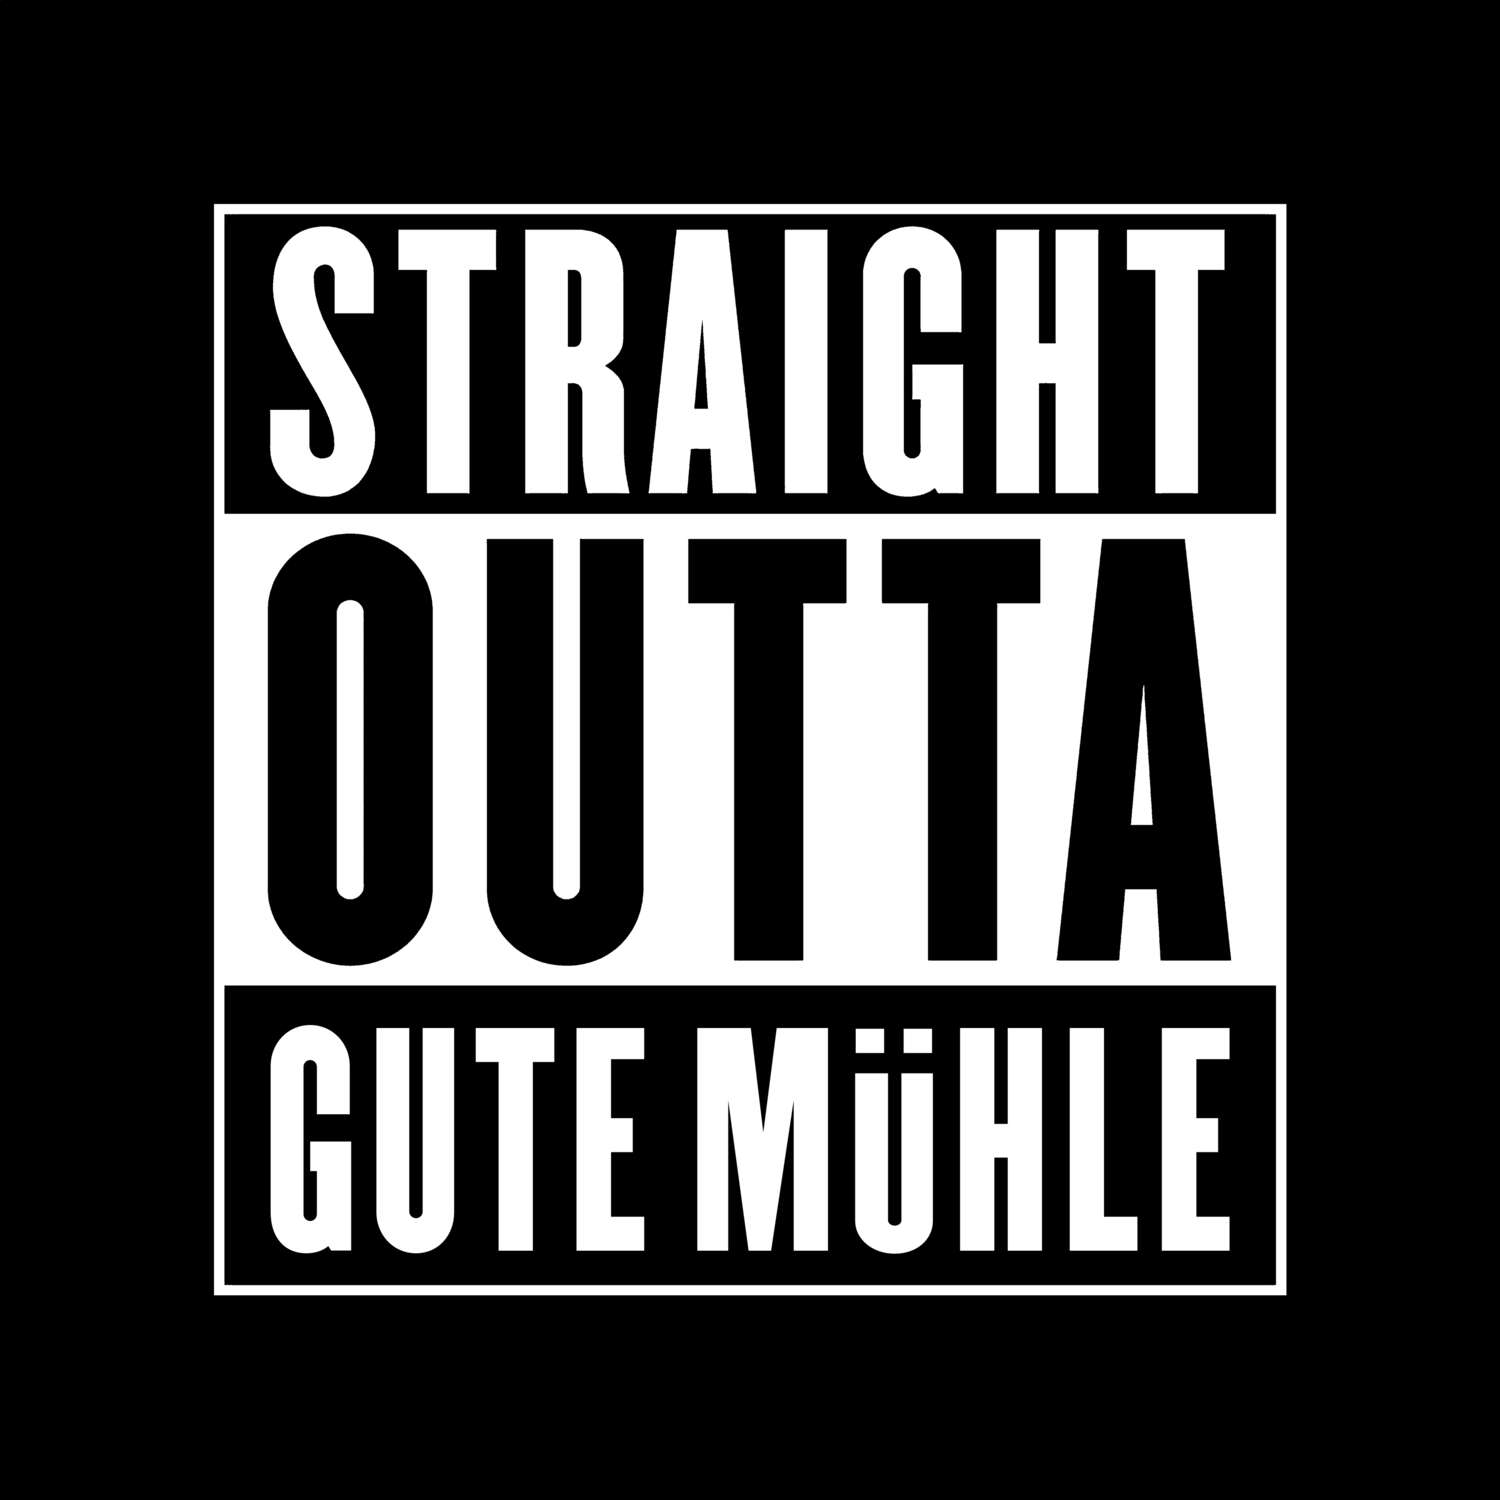 Gute Mühle T-Shirt »Straight Outta«